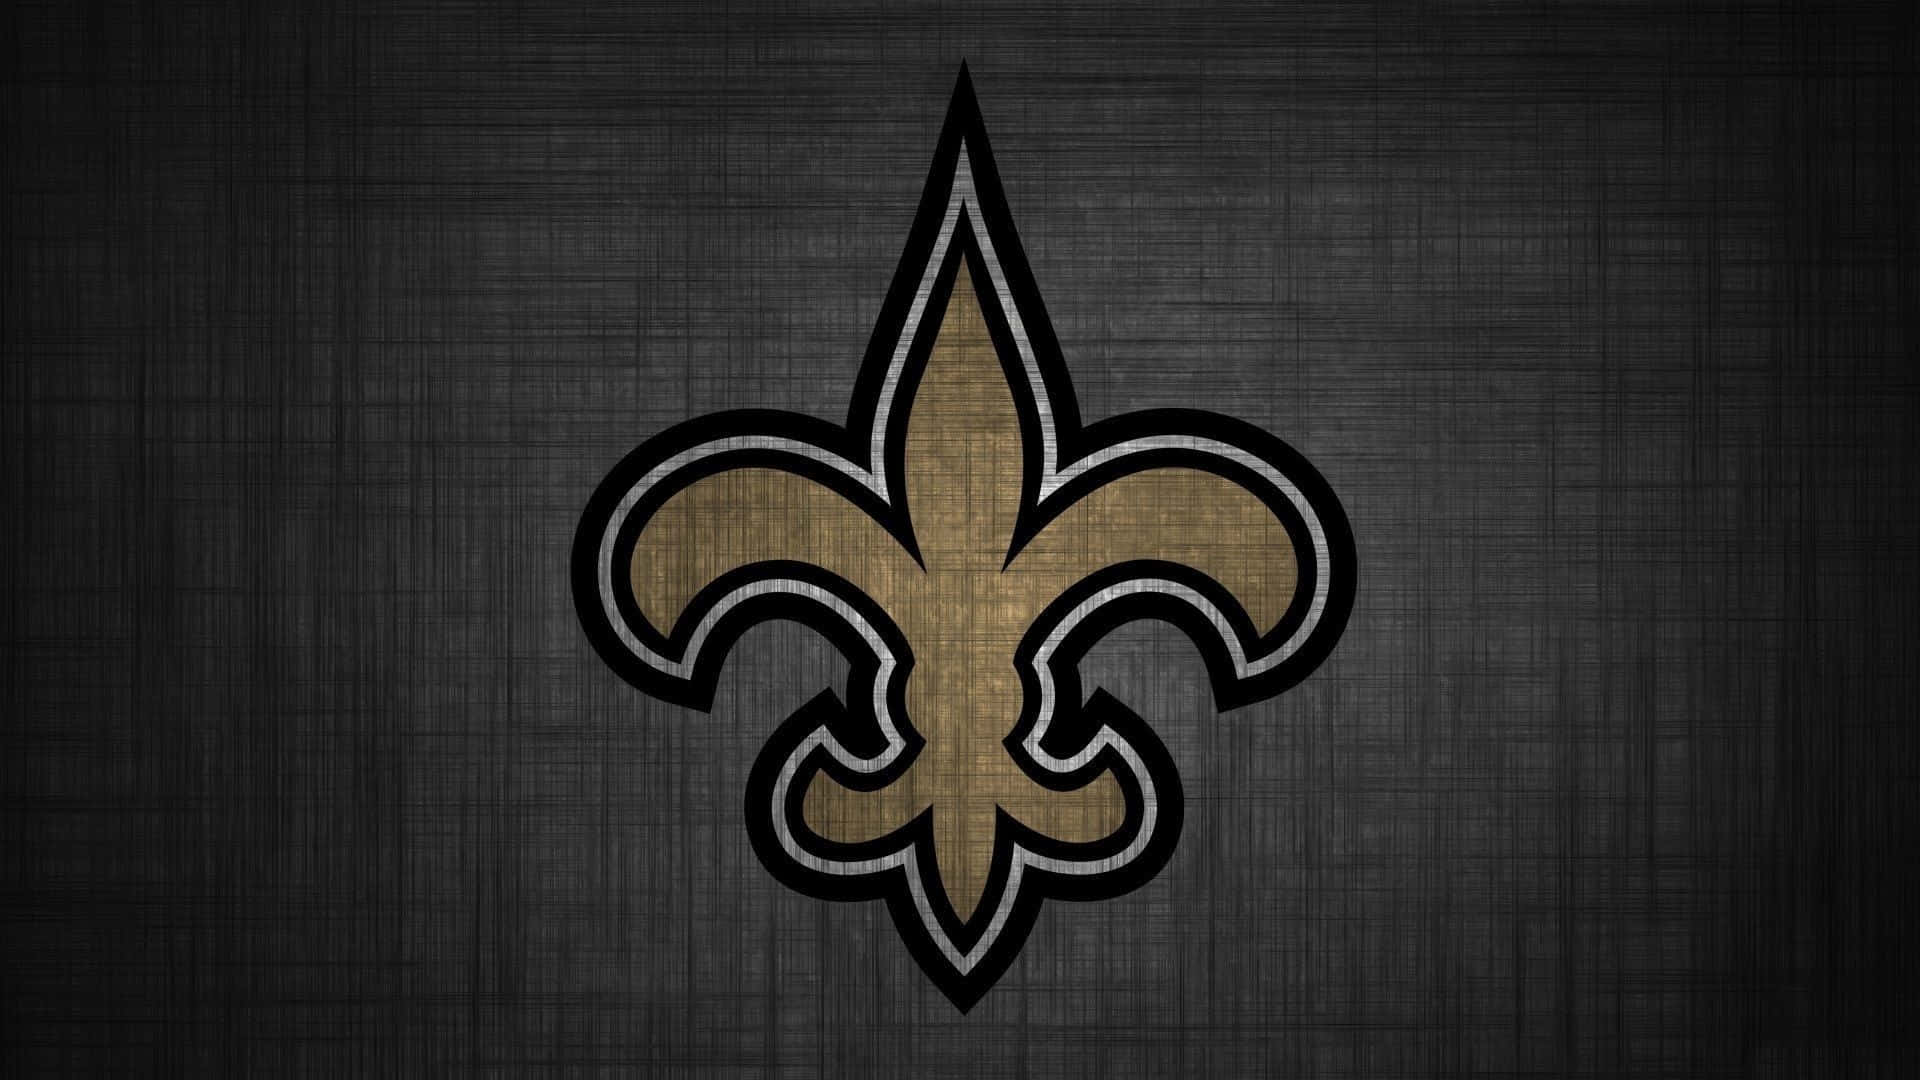 "Cheering Fans of the New Orleans Saints" Wallpaper